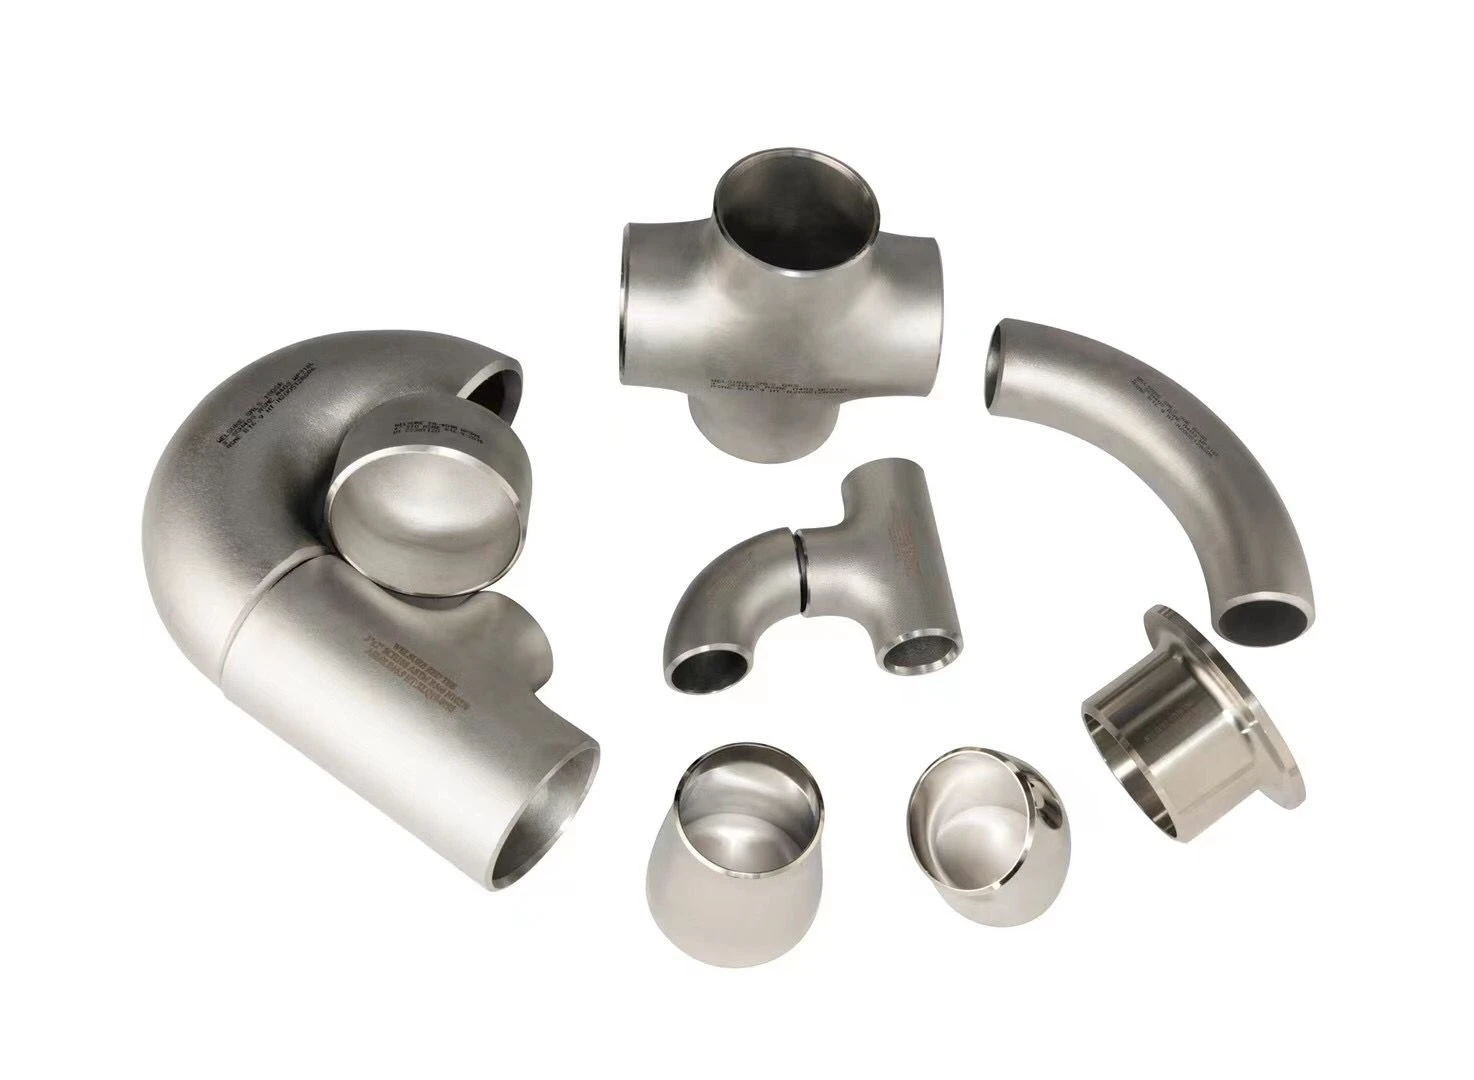 BW Pipe Fittings